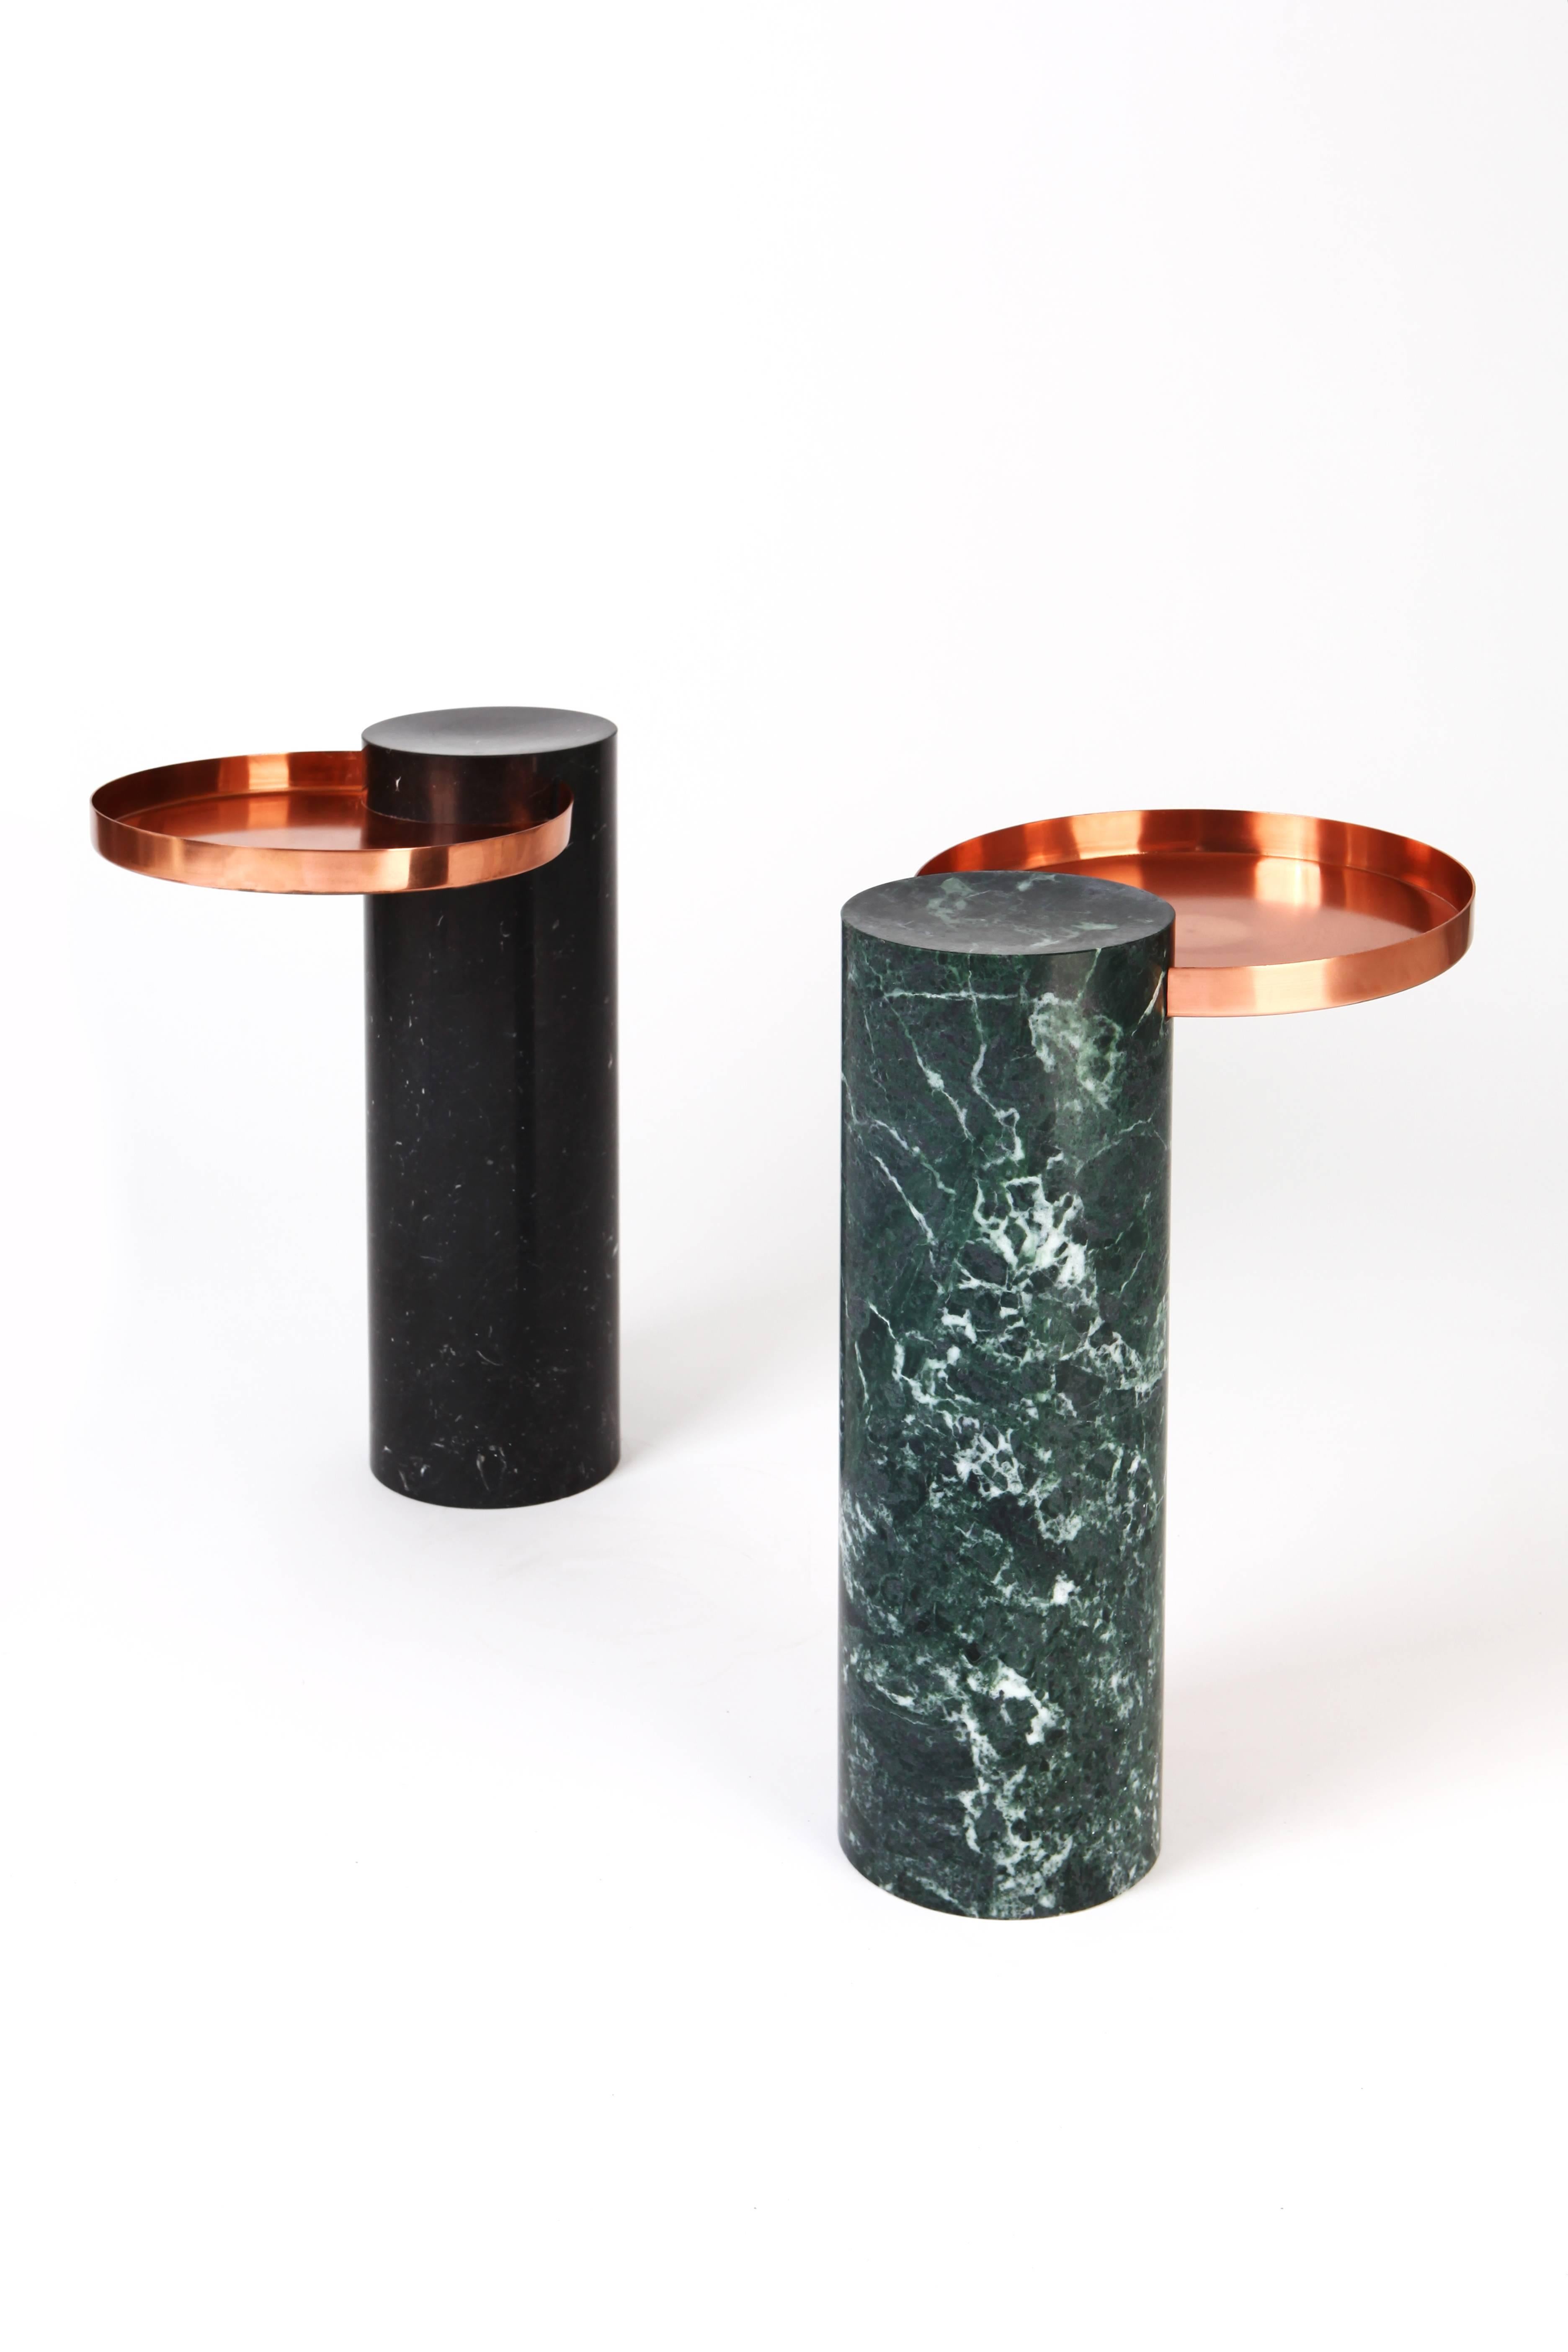 Pair of contemporary gueridons, Sebastian Herkner

The salute table exists in 3 sizes, 3 different marbles for the column and 4 different finishes for the tray for a virtually endless number of configurations. In addition, Salute can be made bespoke